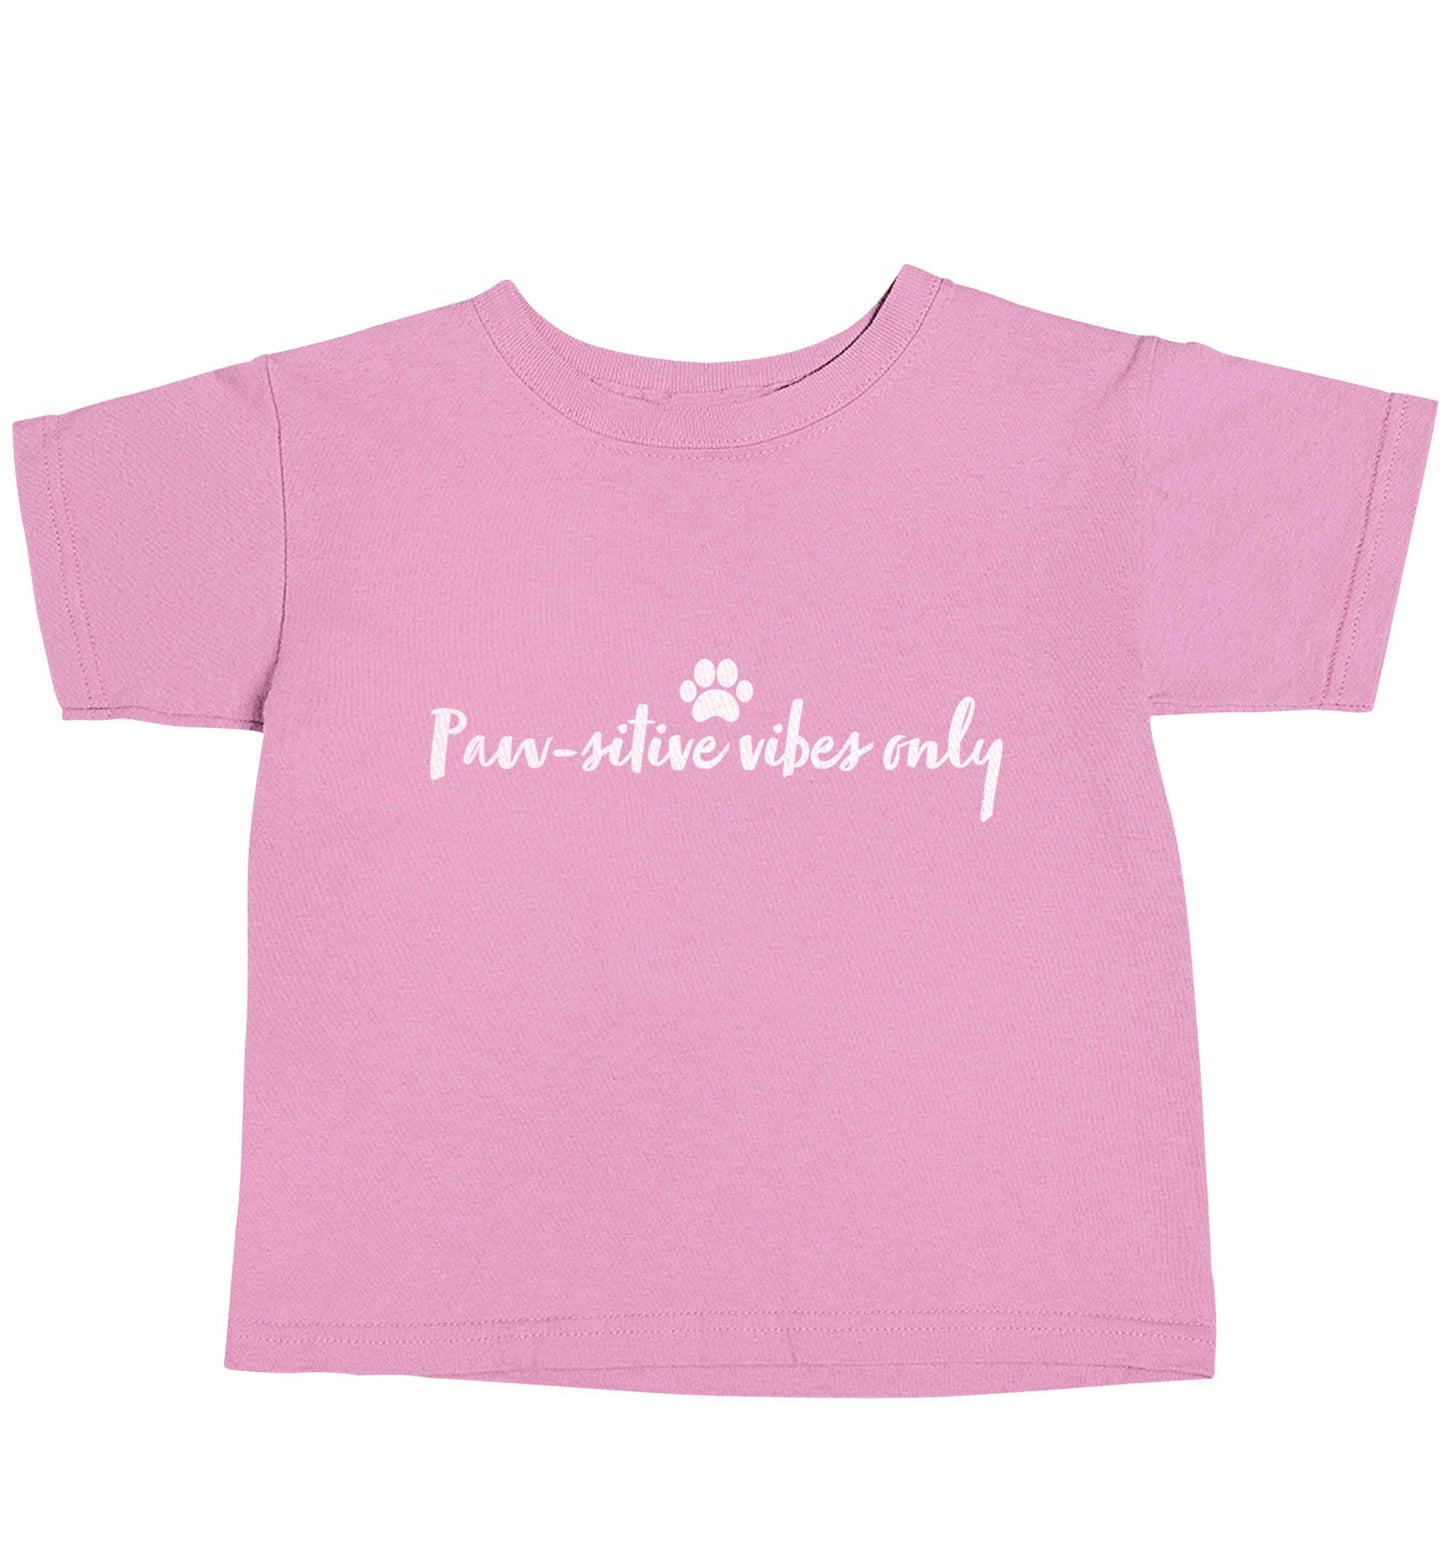 Pawsitive vibes only Kit light pink baby toddler Tshirt 2 Years